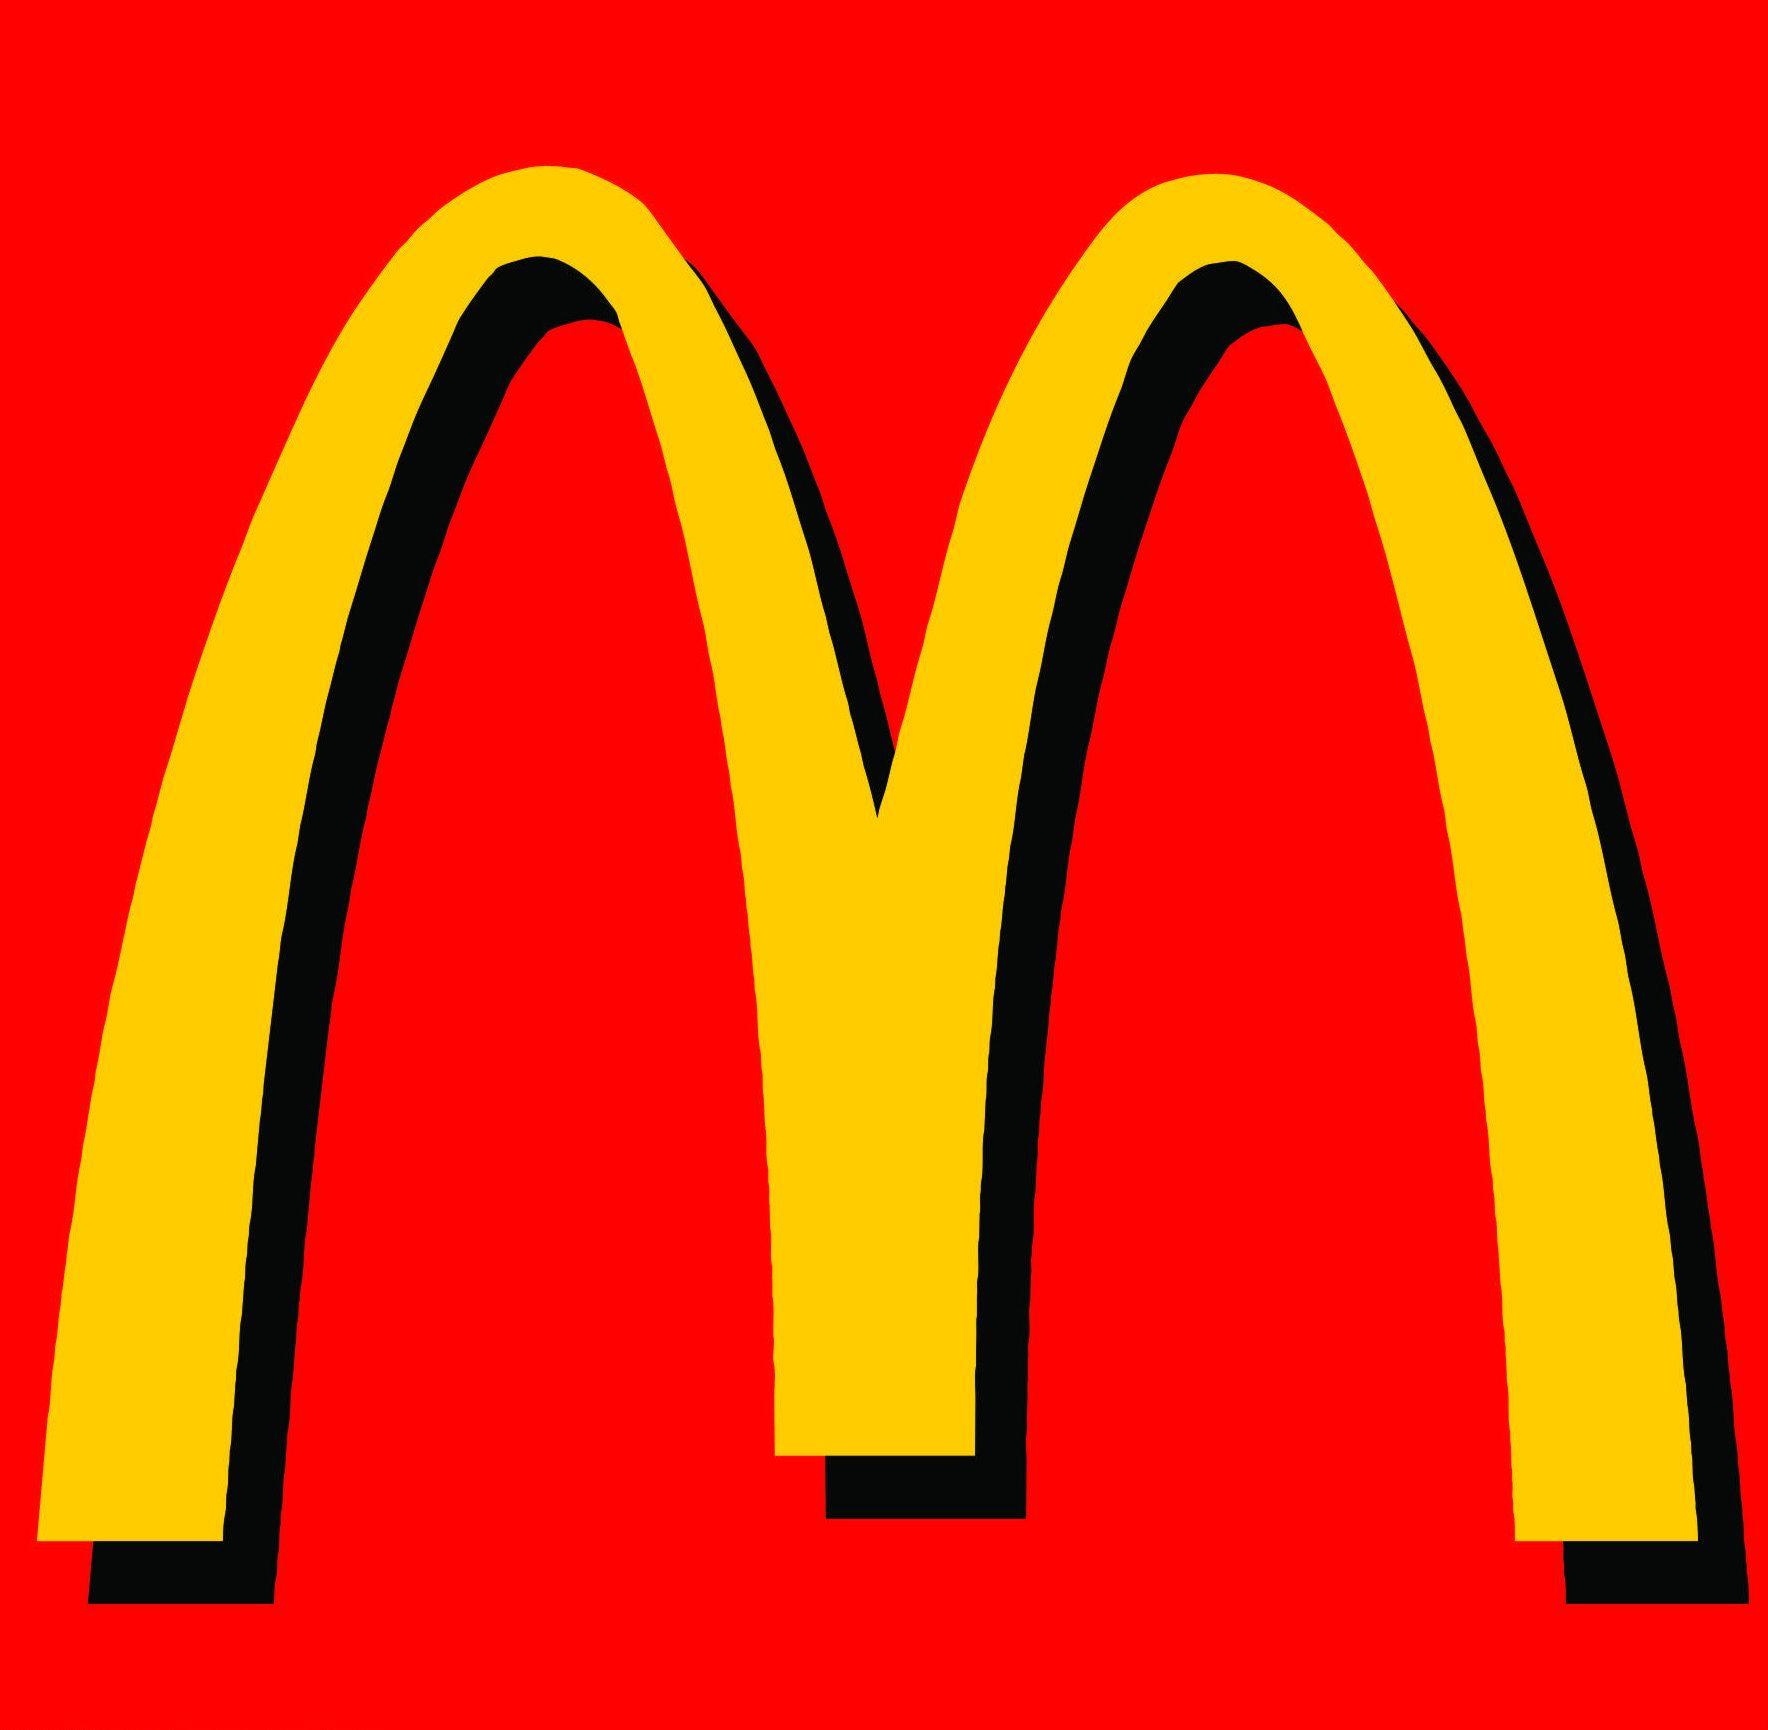 MCD Logo - Published on April 10, 2015 in Advertise ... | Logos in 2019 ...